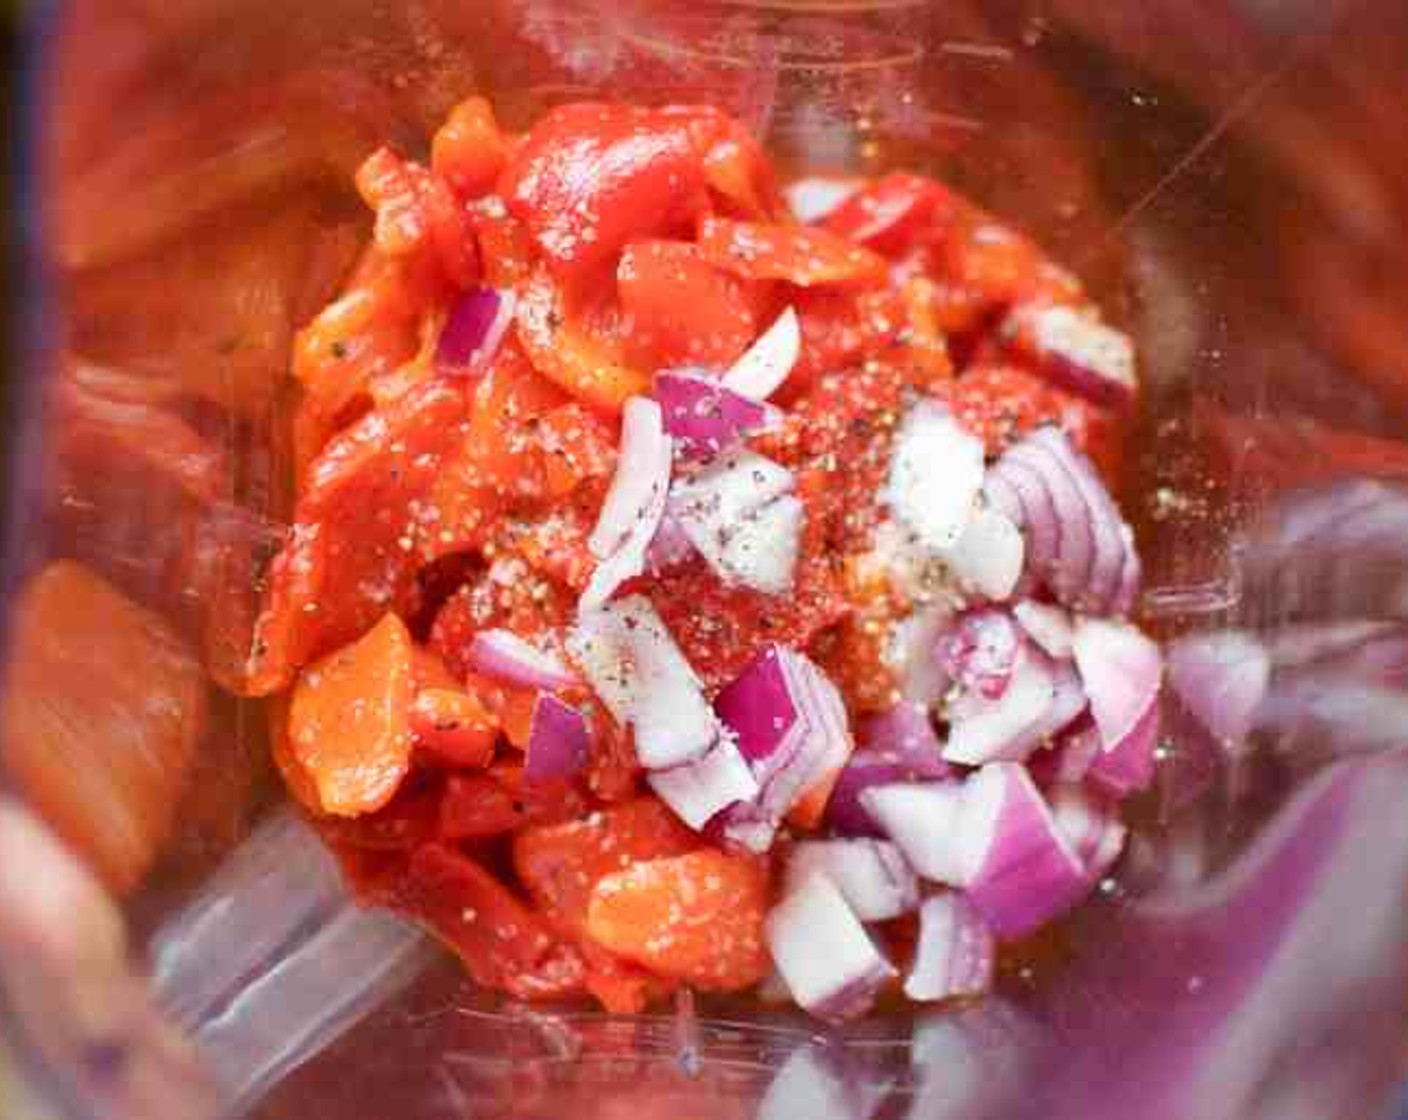 step 10 Combine the roasted garlic, roasted red peppers, Chipotle Chili Puree (1 Tbsp), Red Onion (1/2), Red Wine Vinegar (1/4 cup), Honey (1 Tbsp), and Dijon Mustard (1 Tbsp) in a blender. Season with salt and pepper. Blend until smooth.